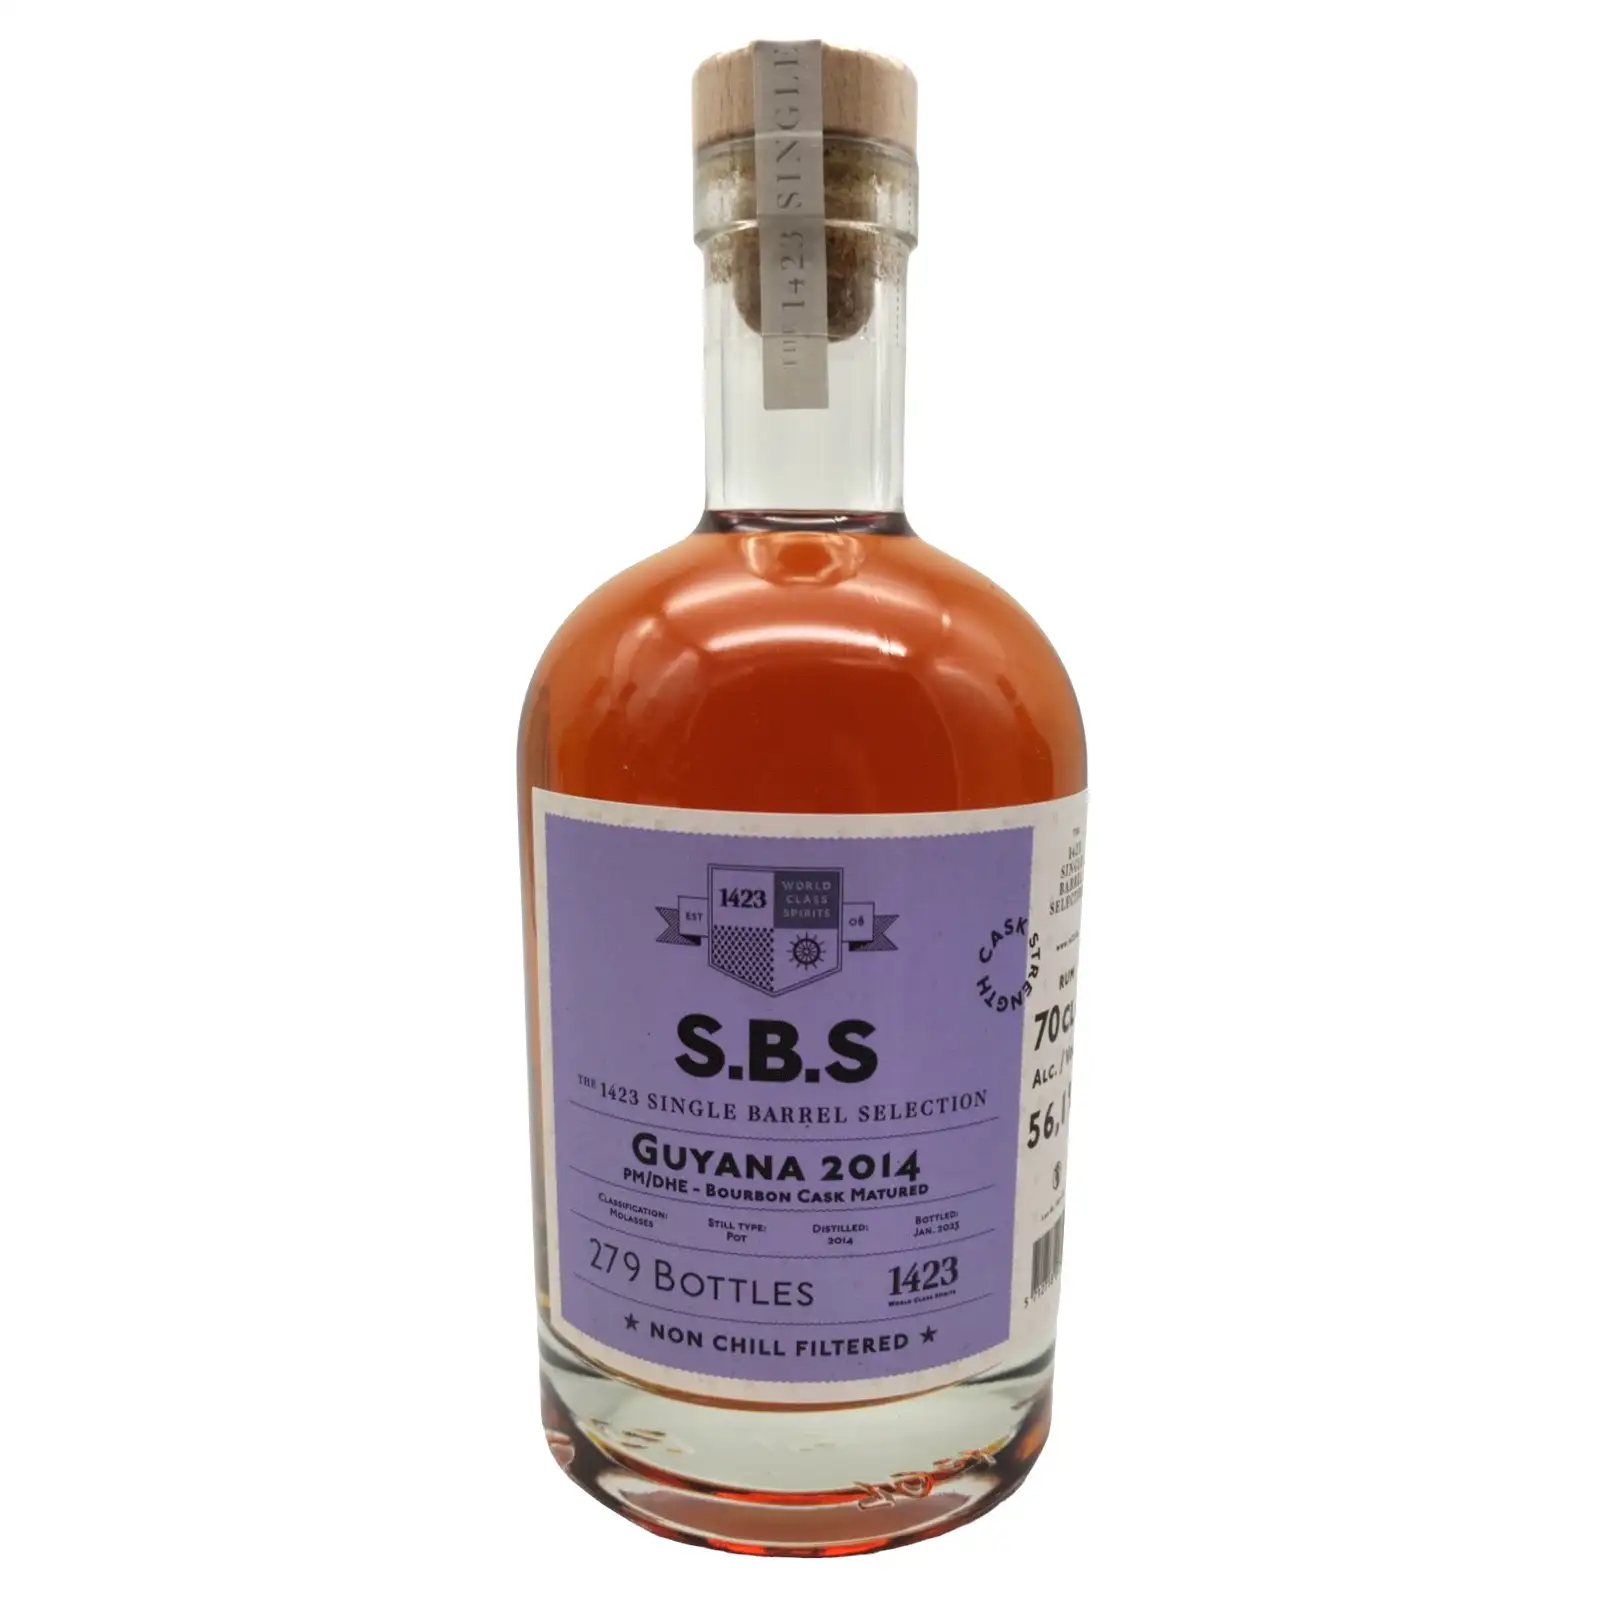 Image of the front of the bottle of the rum S.B.S Guyana 2014 PM/DHE